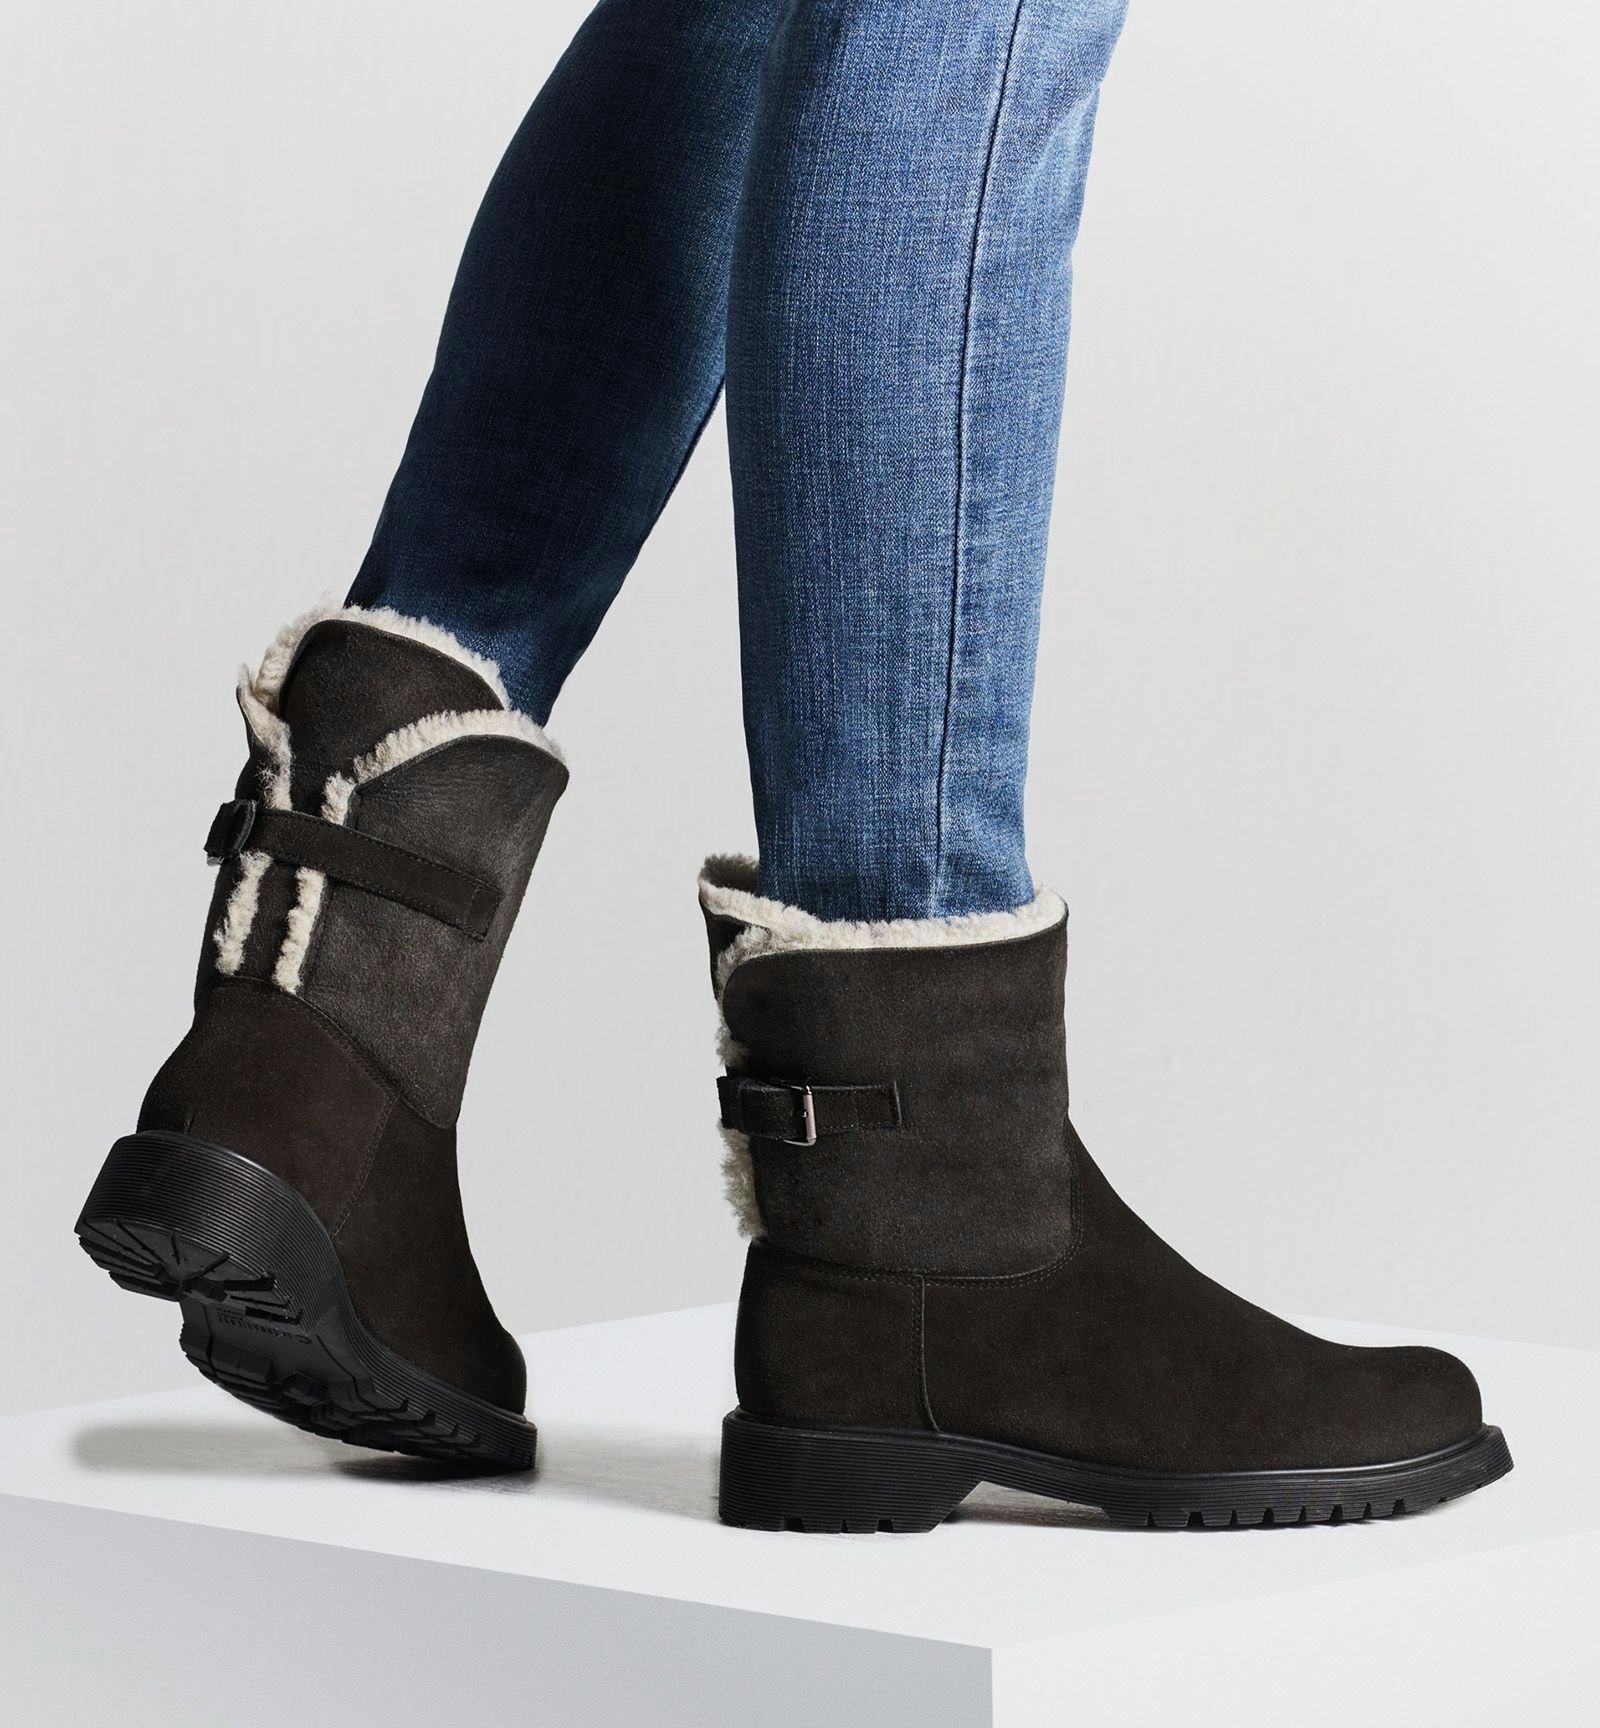 canadienne winter boots